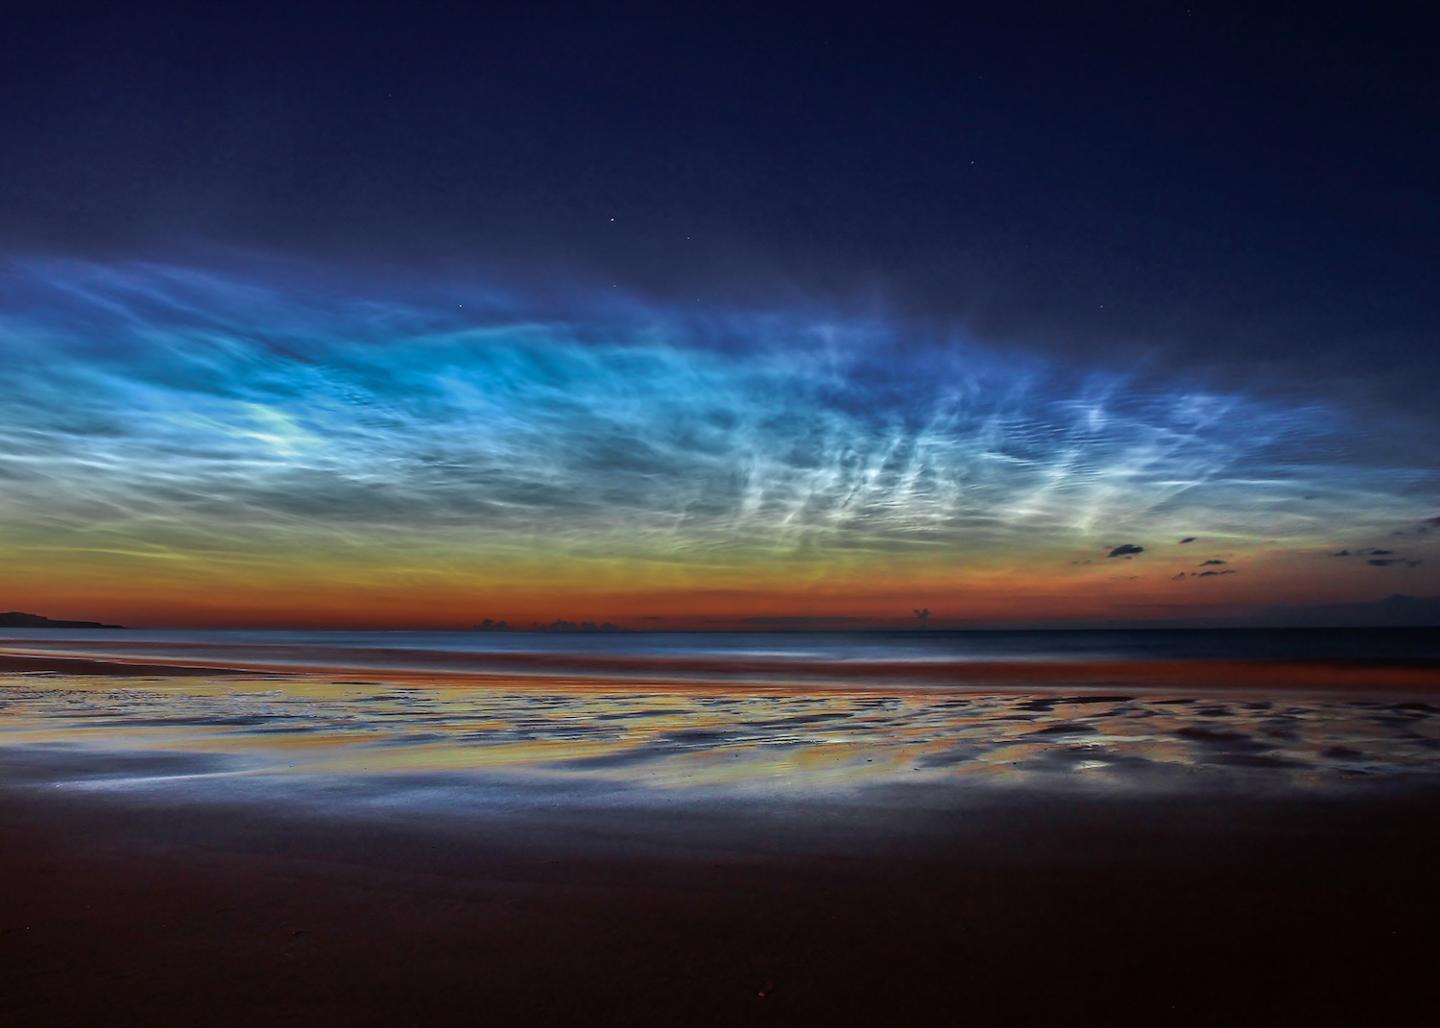 Sunderland Noctilucent Cloud Display © Matt Robinson, runner up, Skyscapes, Insight Astronomy Photographer of the Year 2015